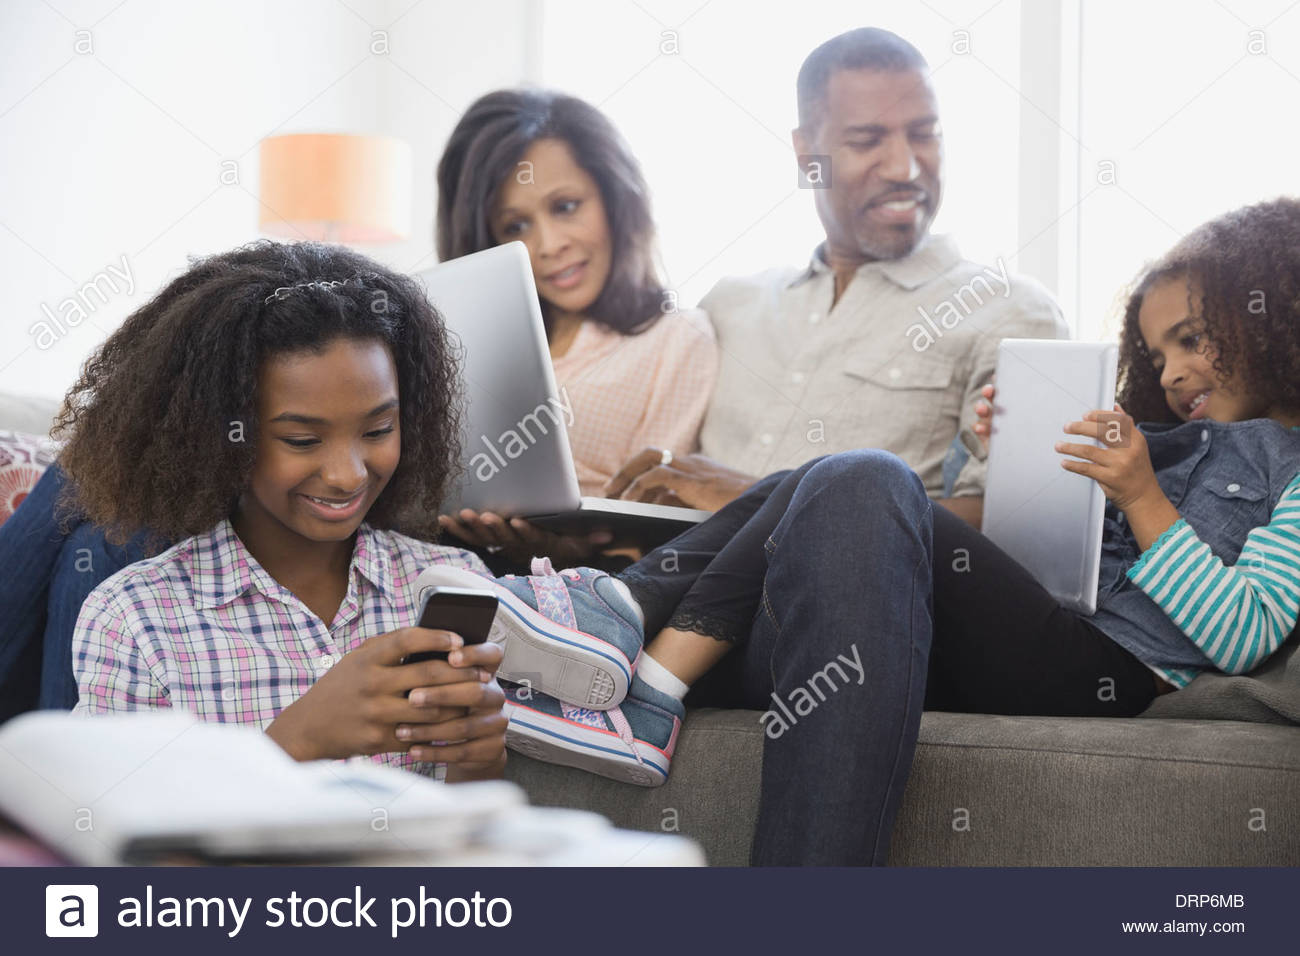 Family using wireless devices at home Stock Photo